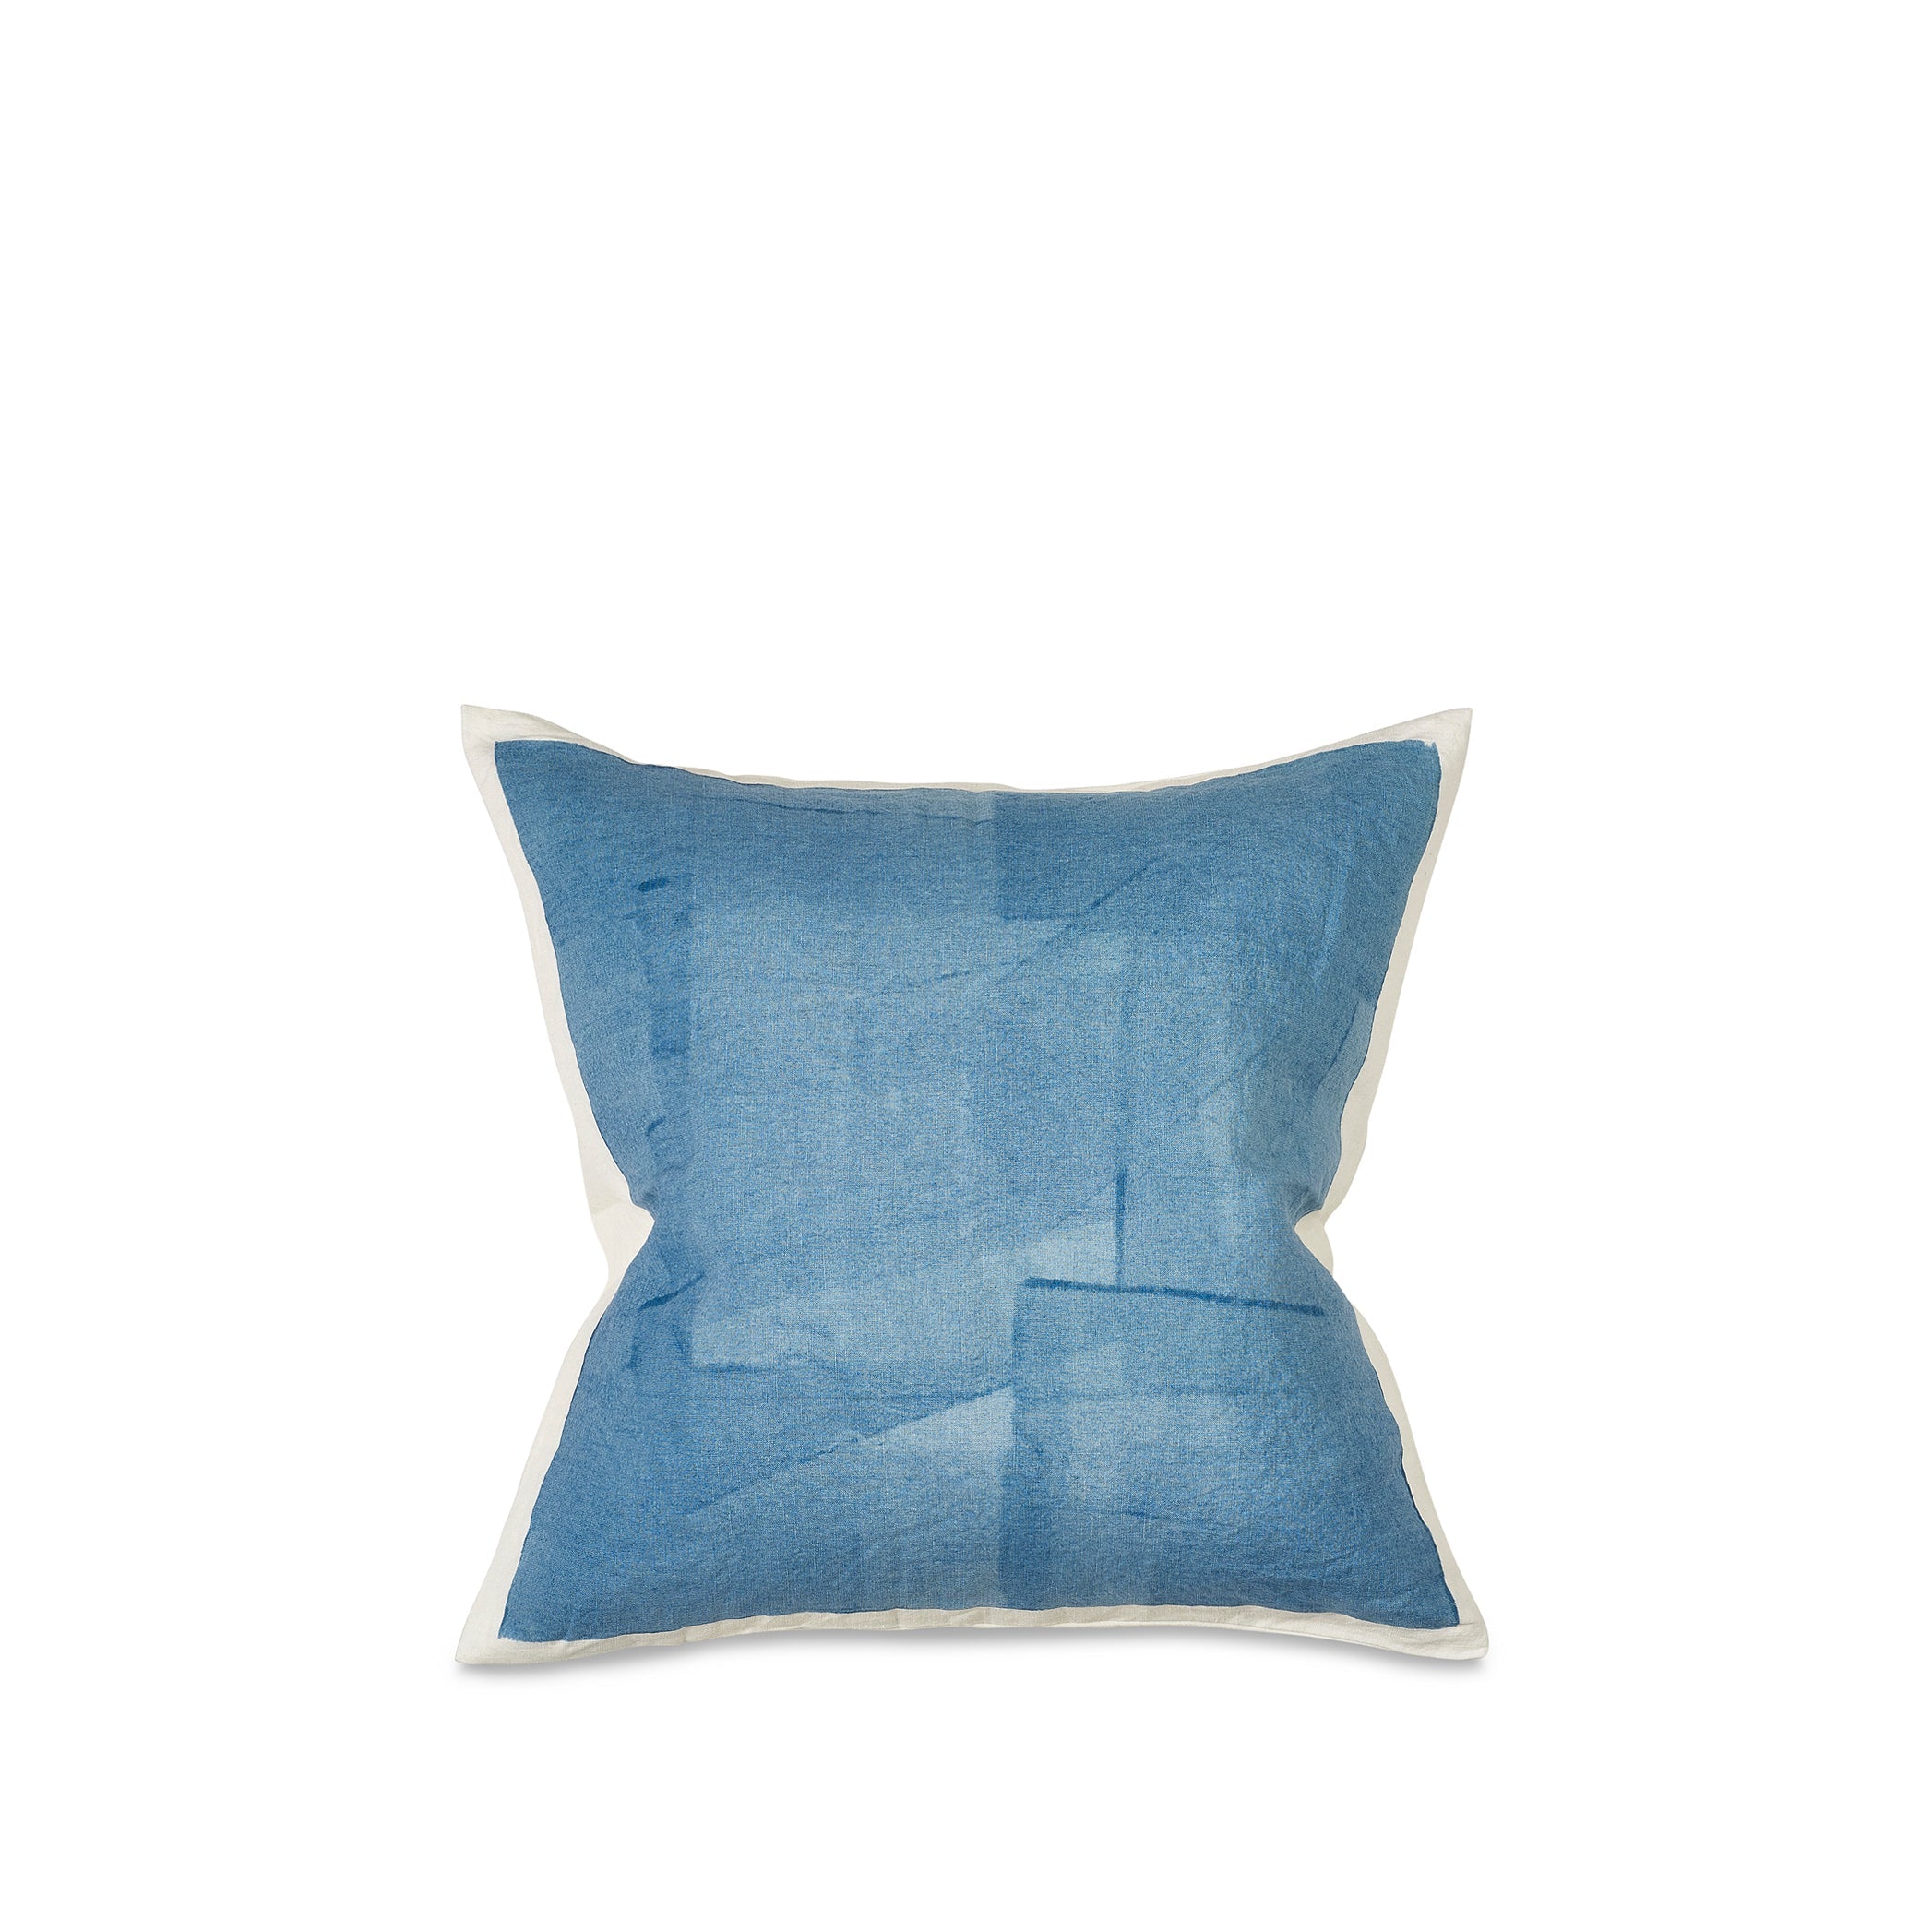 Hand Painted Linen Cushion in Sky Blue, 50cm x 50cm